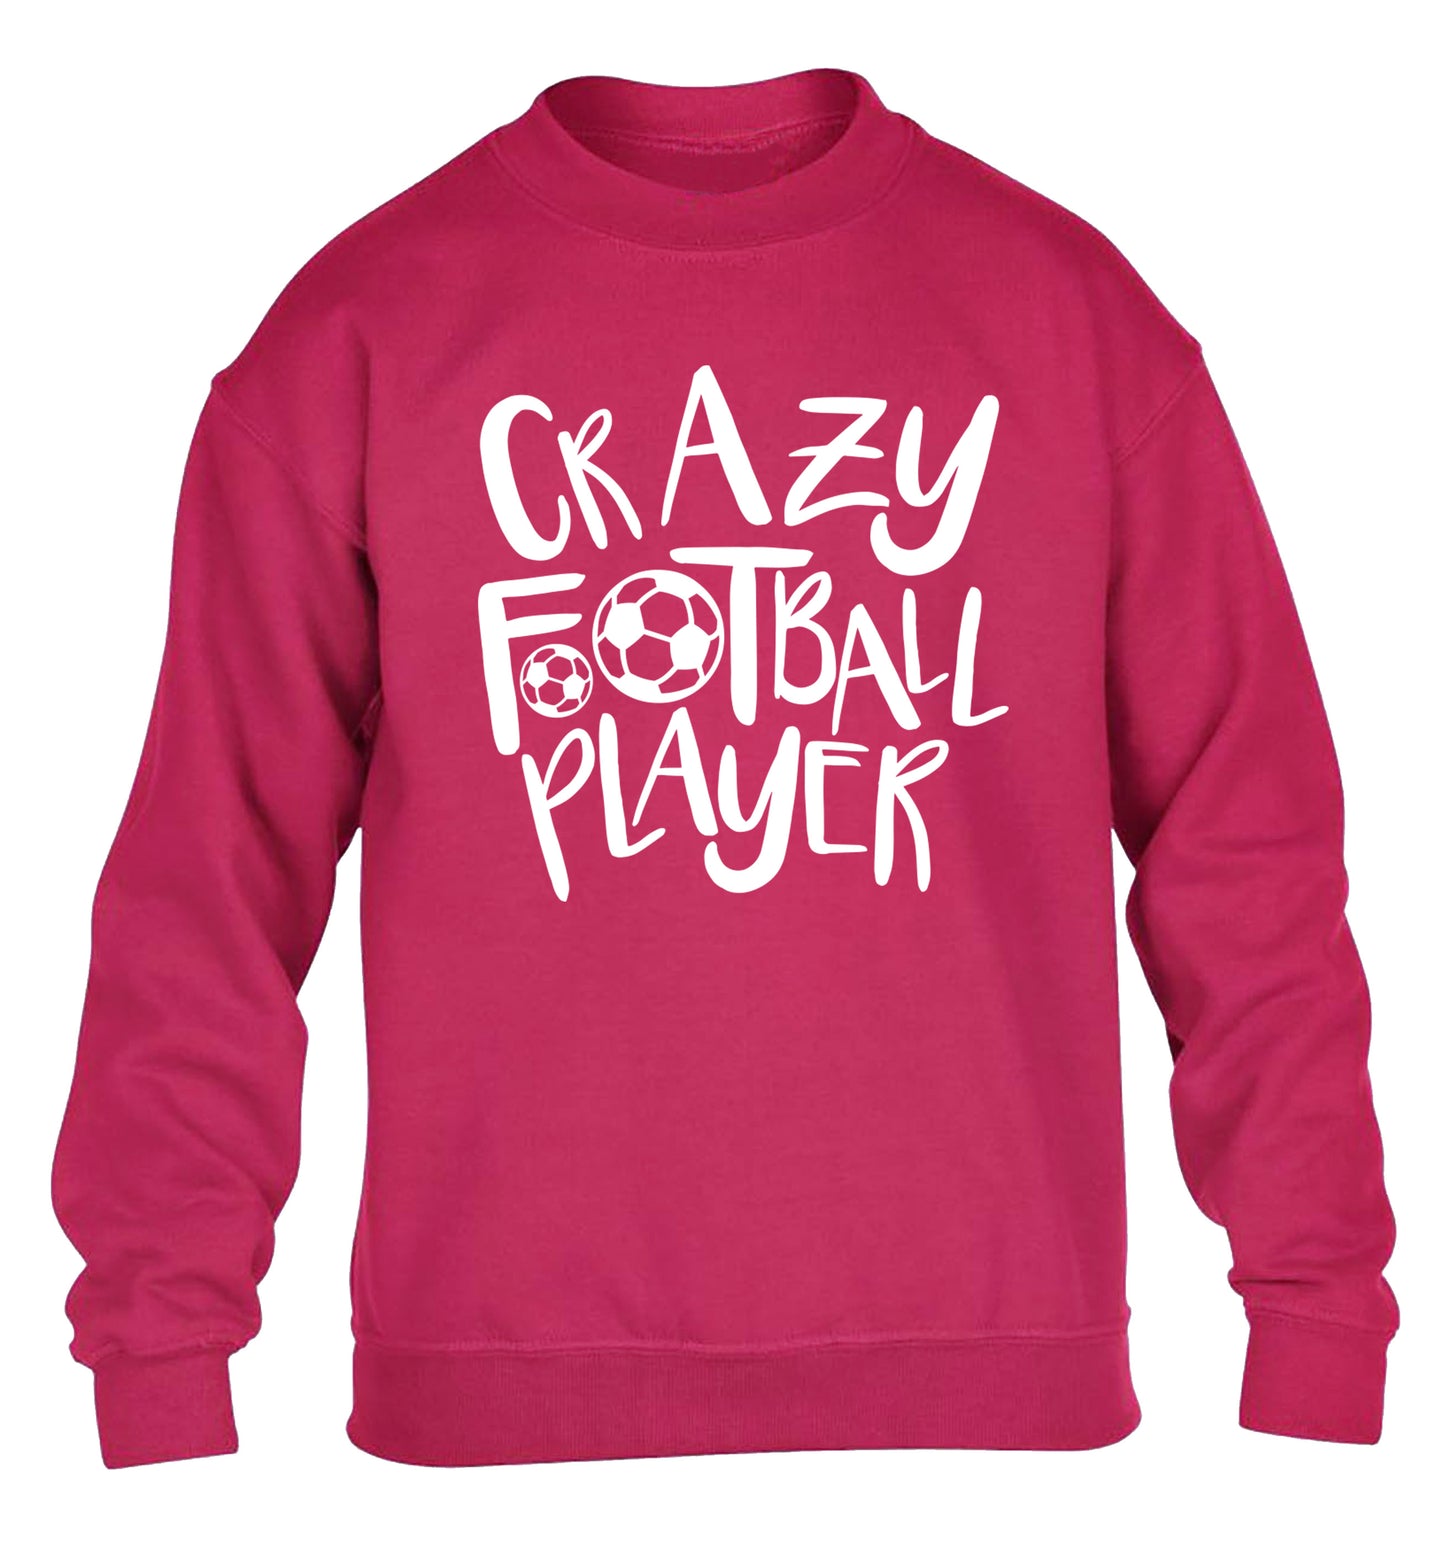 Crazy football player children's pink sweater 12-14 Years